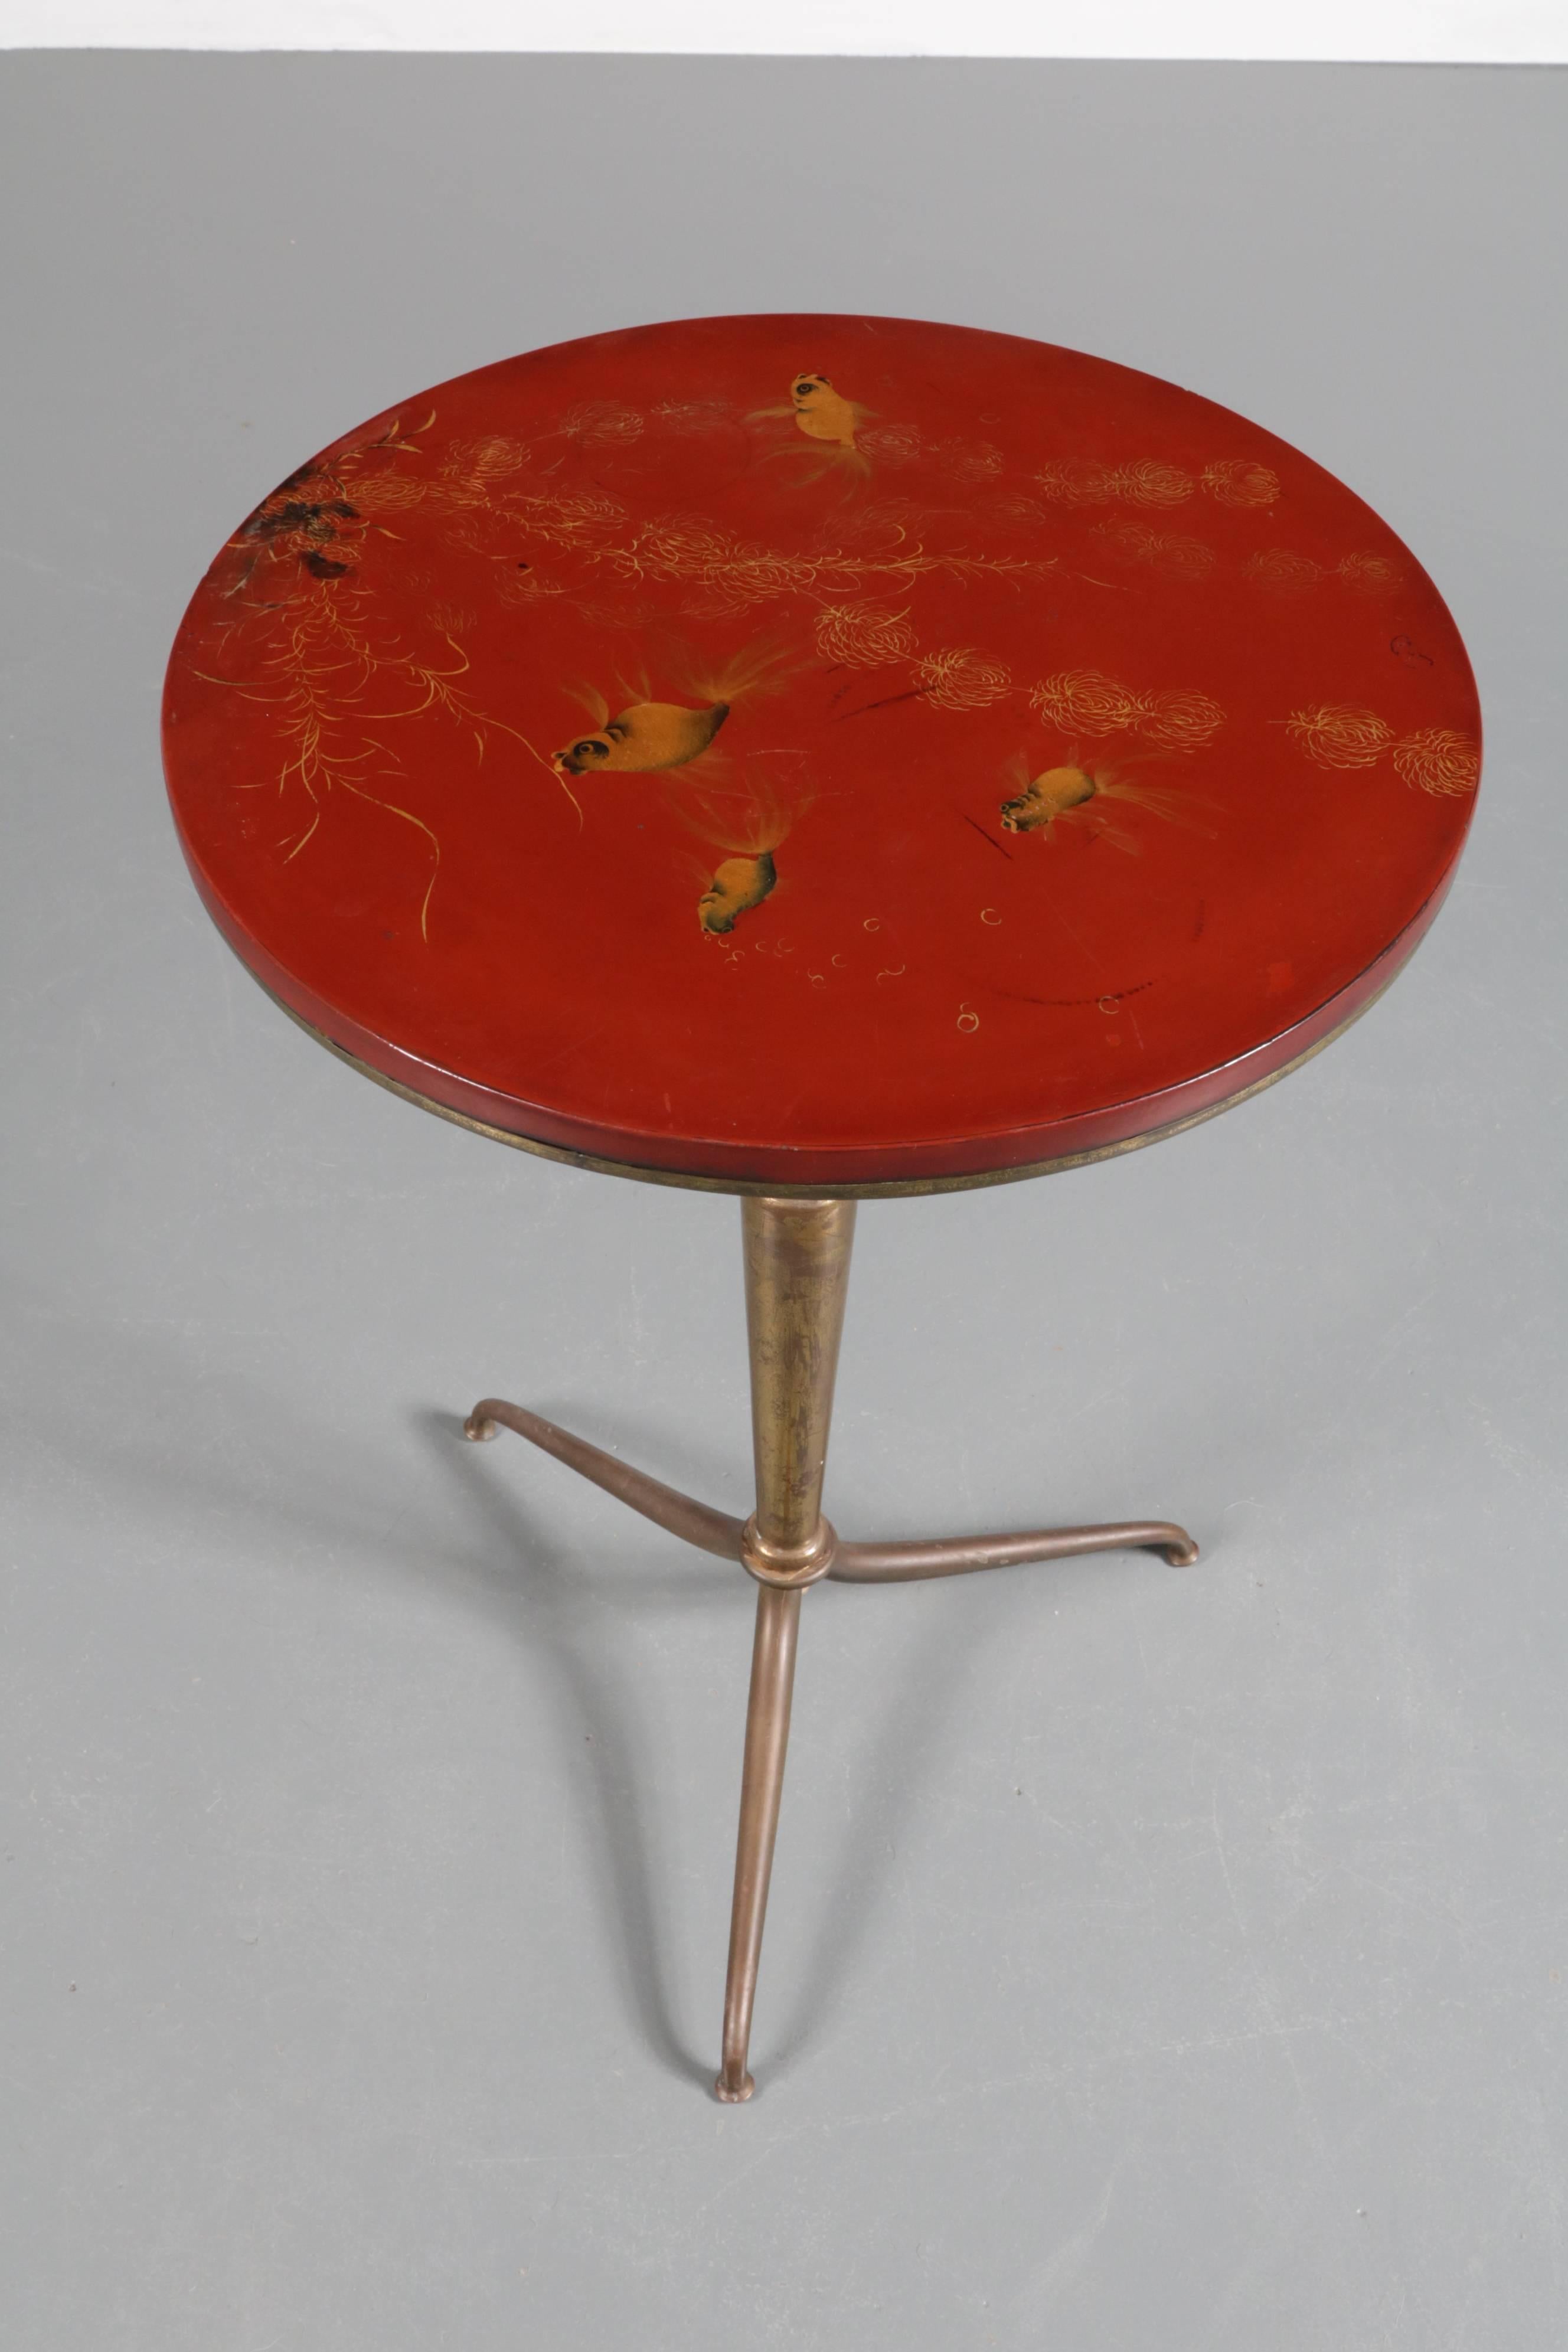 Vietnamese Hand-Painted Side Table by Thanhley, Vietnam, circa 1940